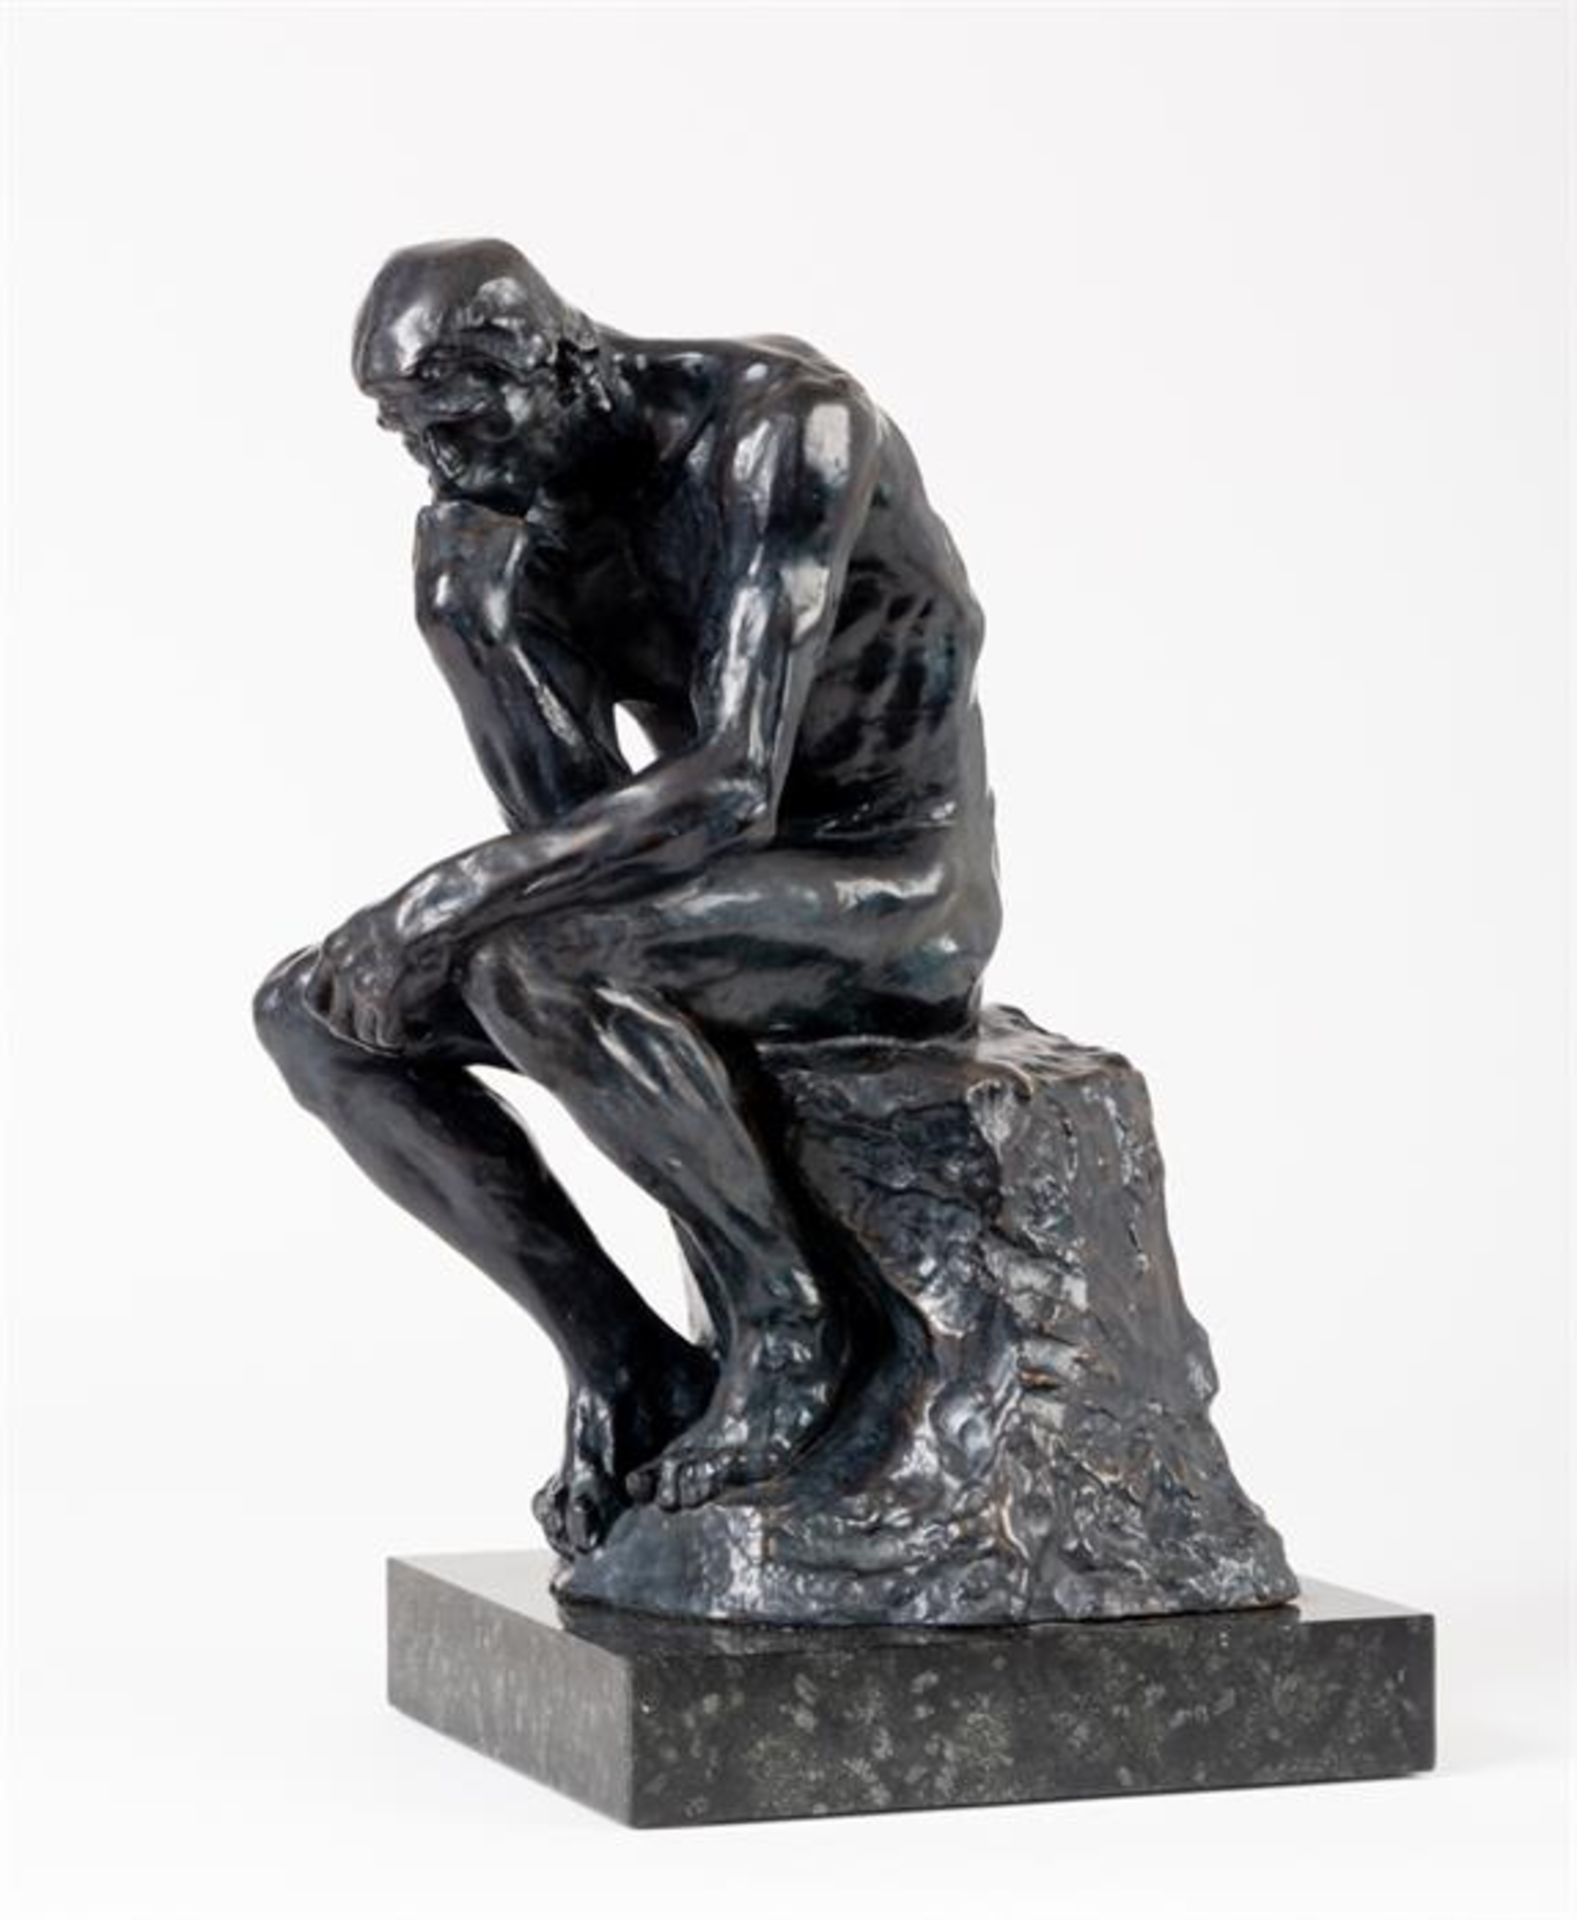 Auguste RODIN (1840-1917), after